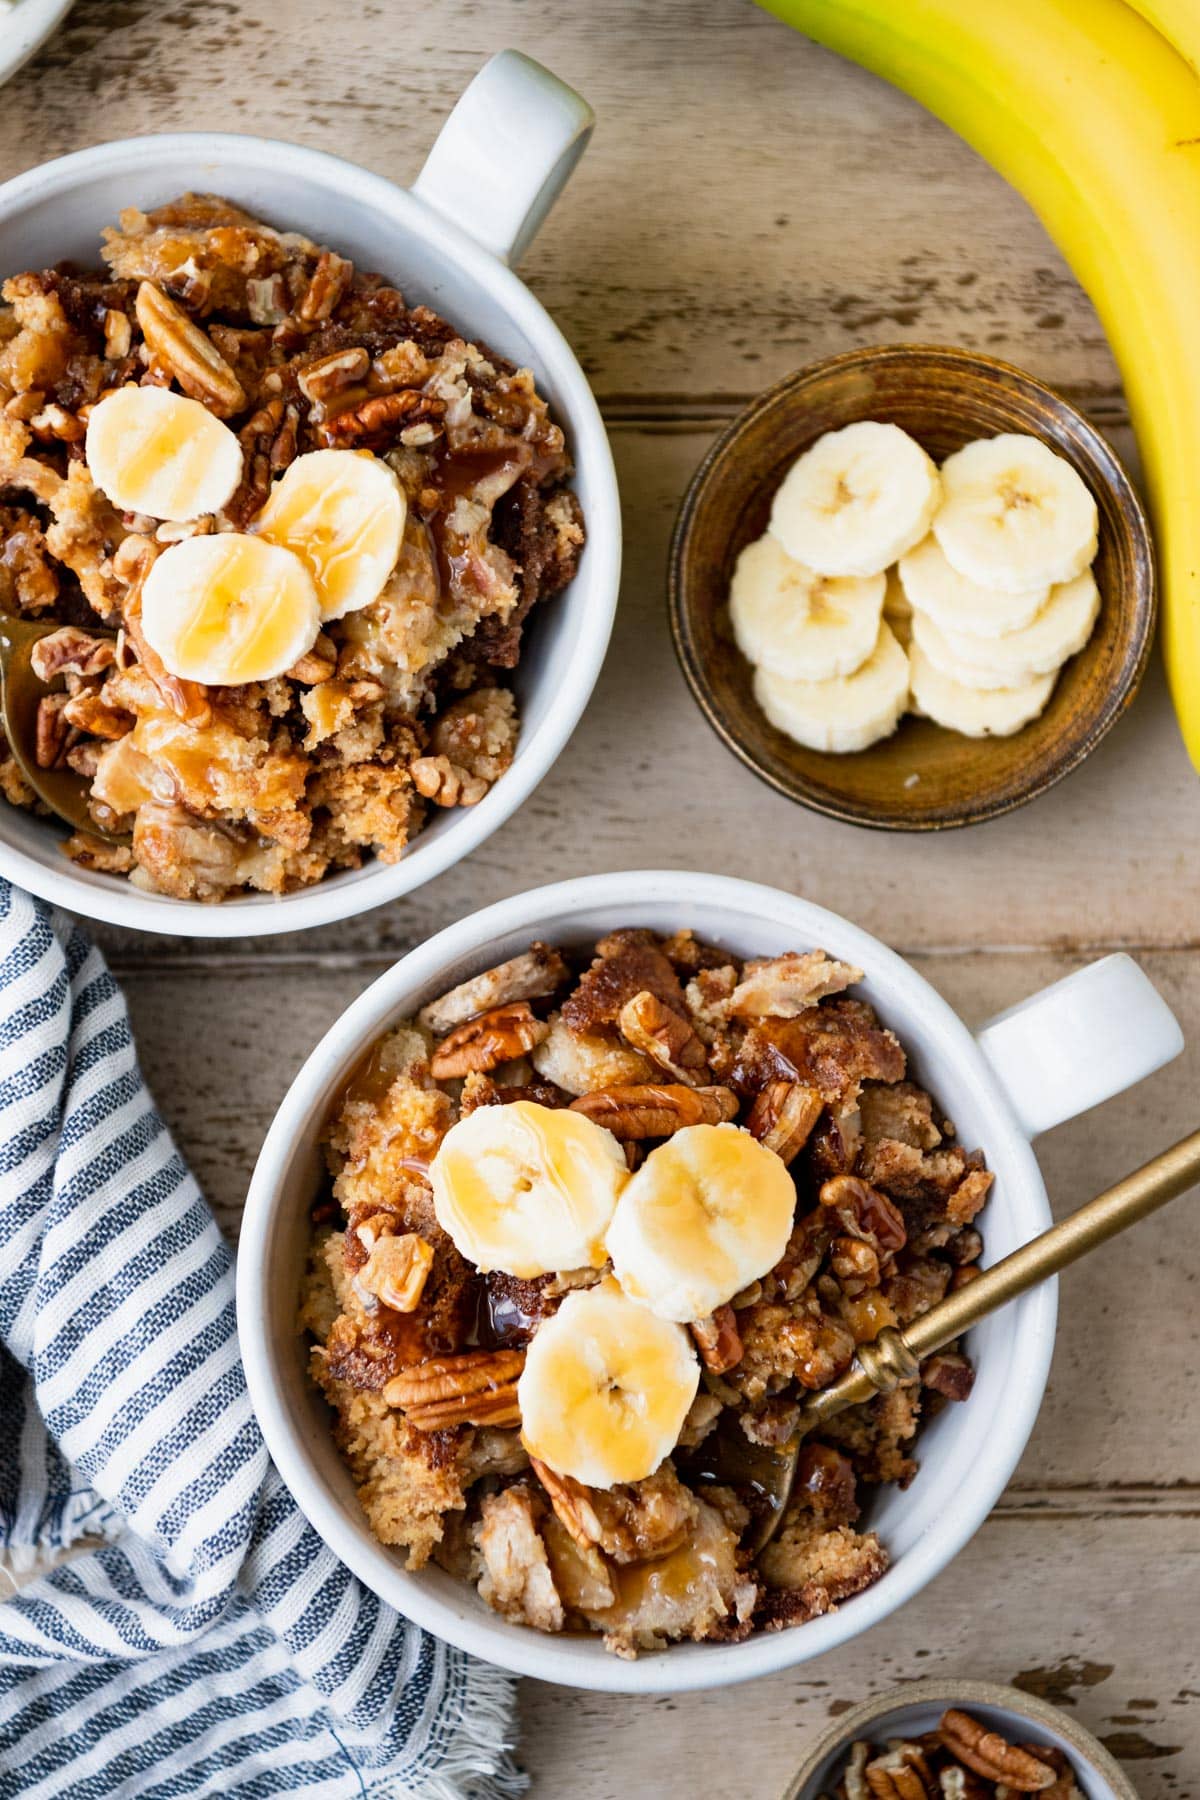 Two bowls of dump cake with bananas on a table with extra sliced bananas.